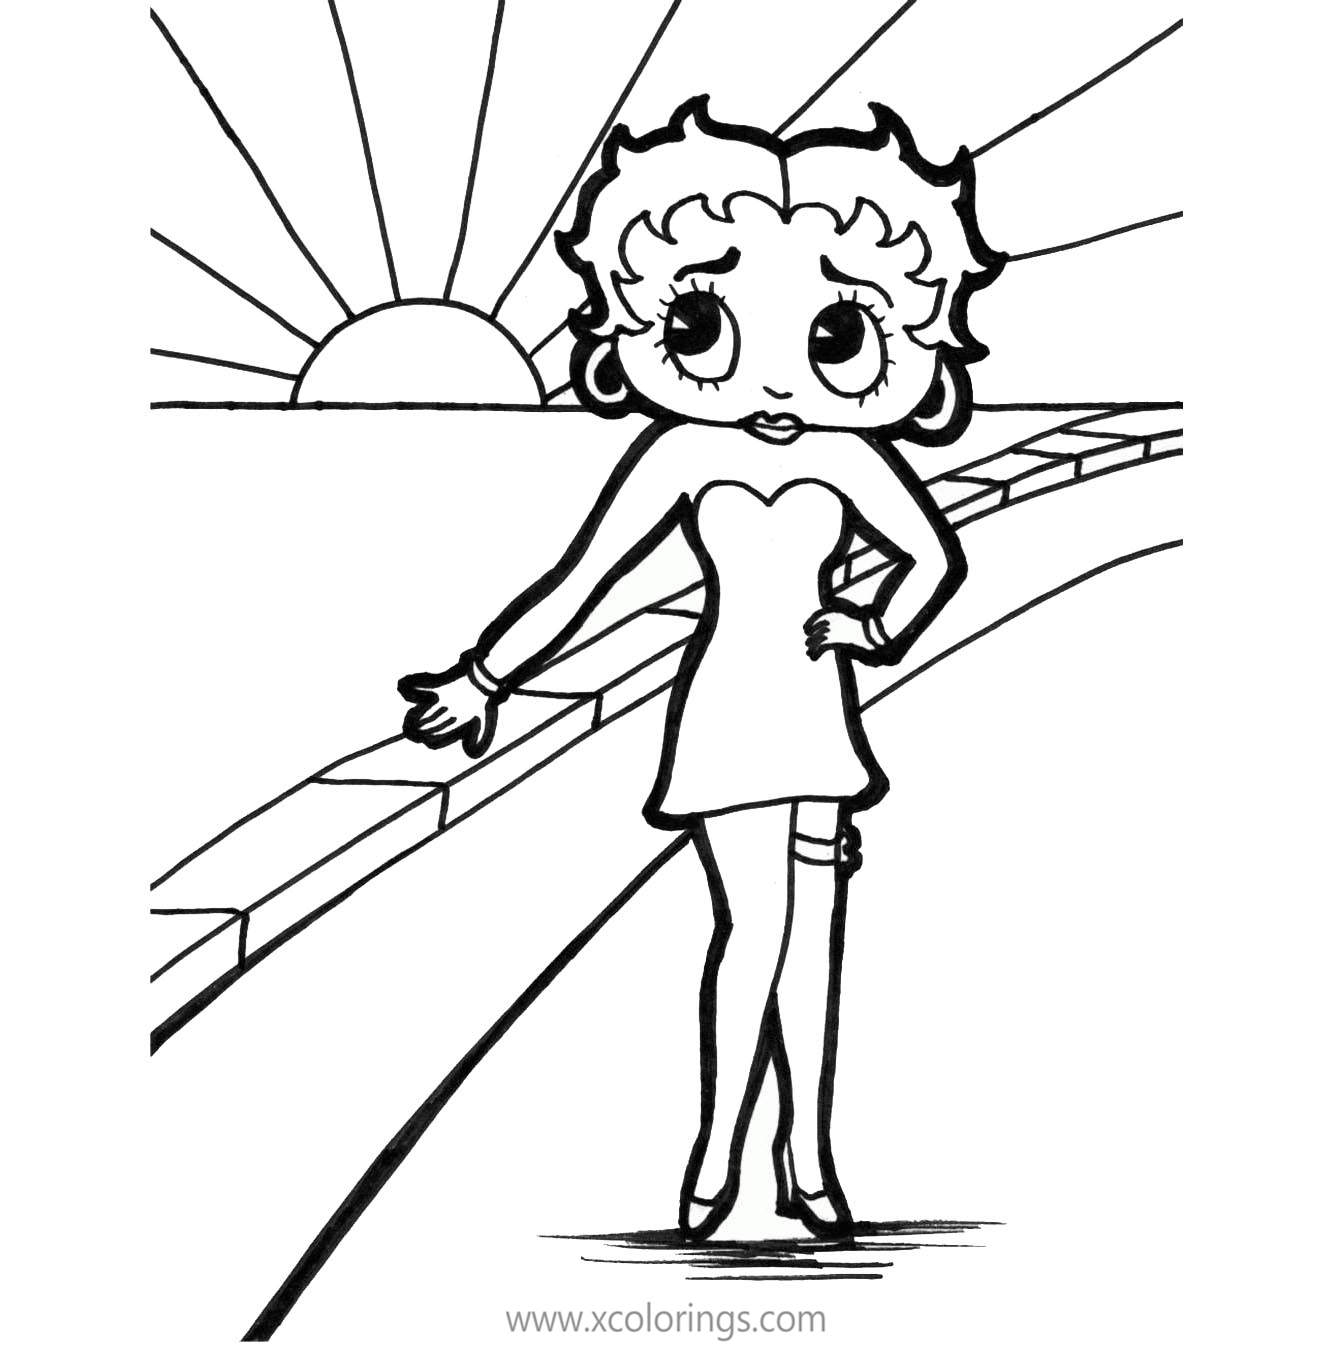 Free Betty Boop Coloring Pages Sunrise printable